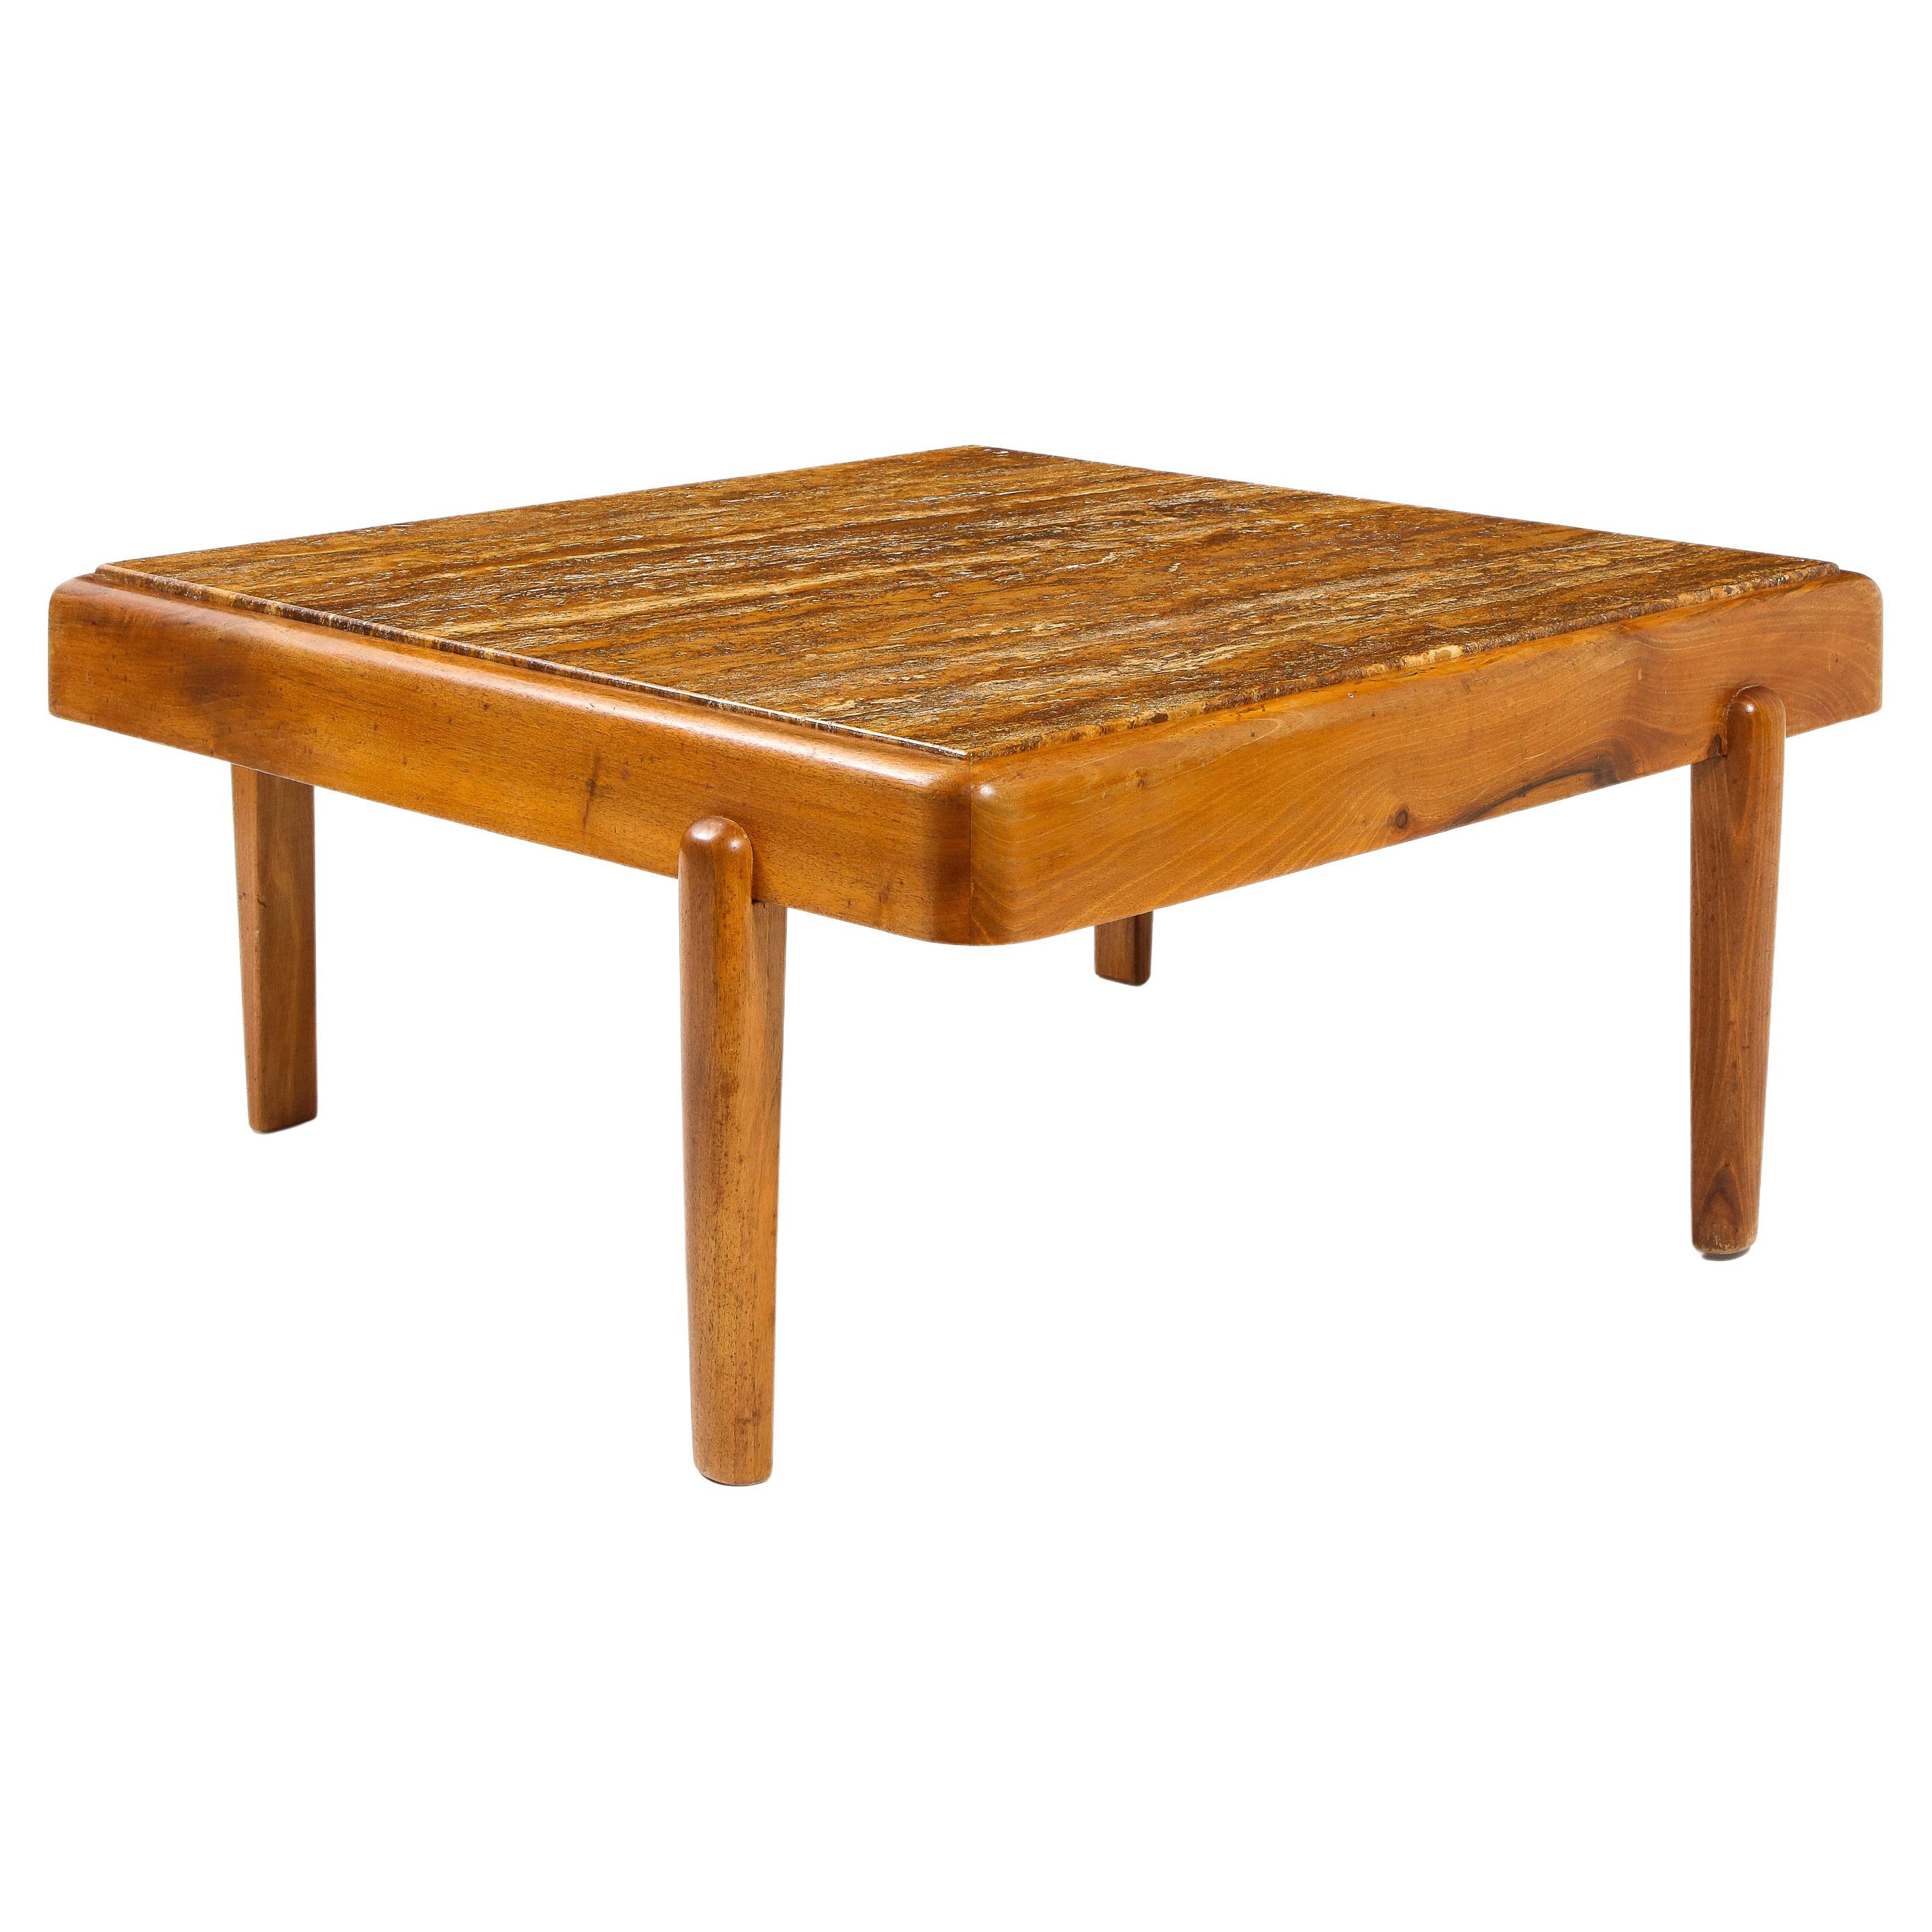 Large elm & stripped travertine coffee table. The top's frame rests on four legs offset from each angle. In good vintage condition. Full refinishing is available and priced upon request.